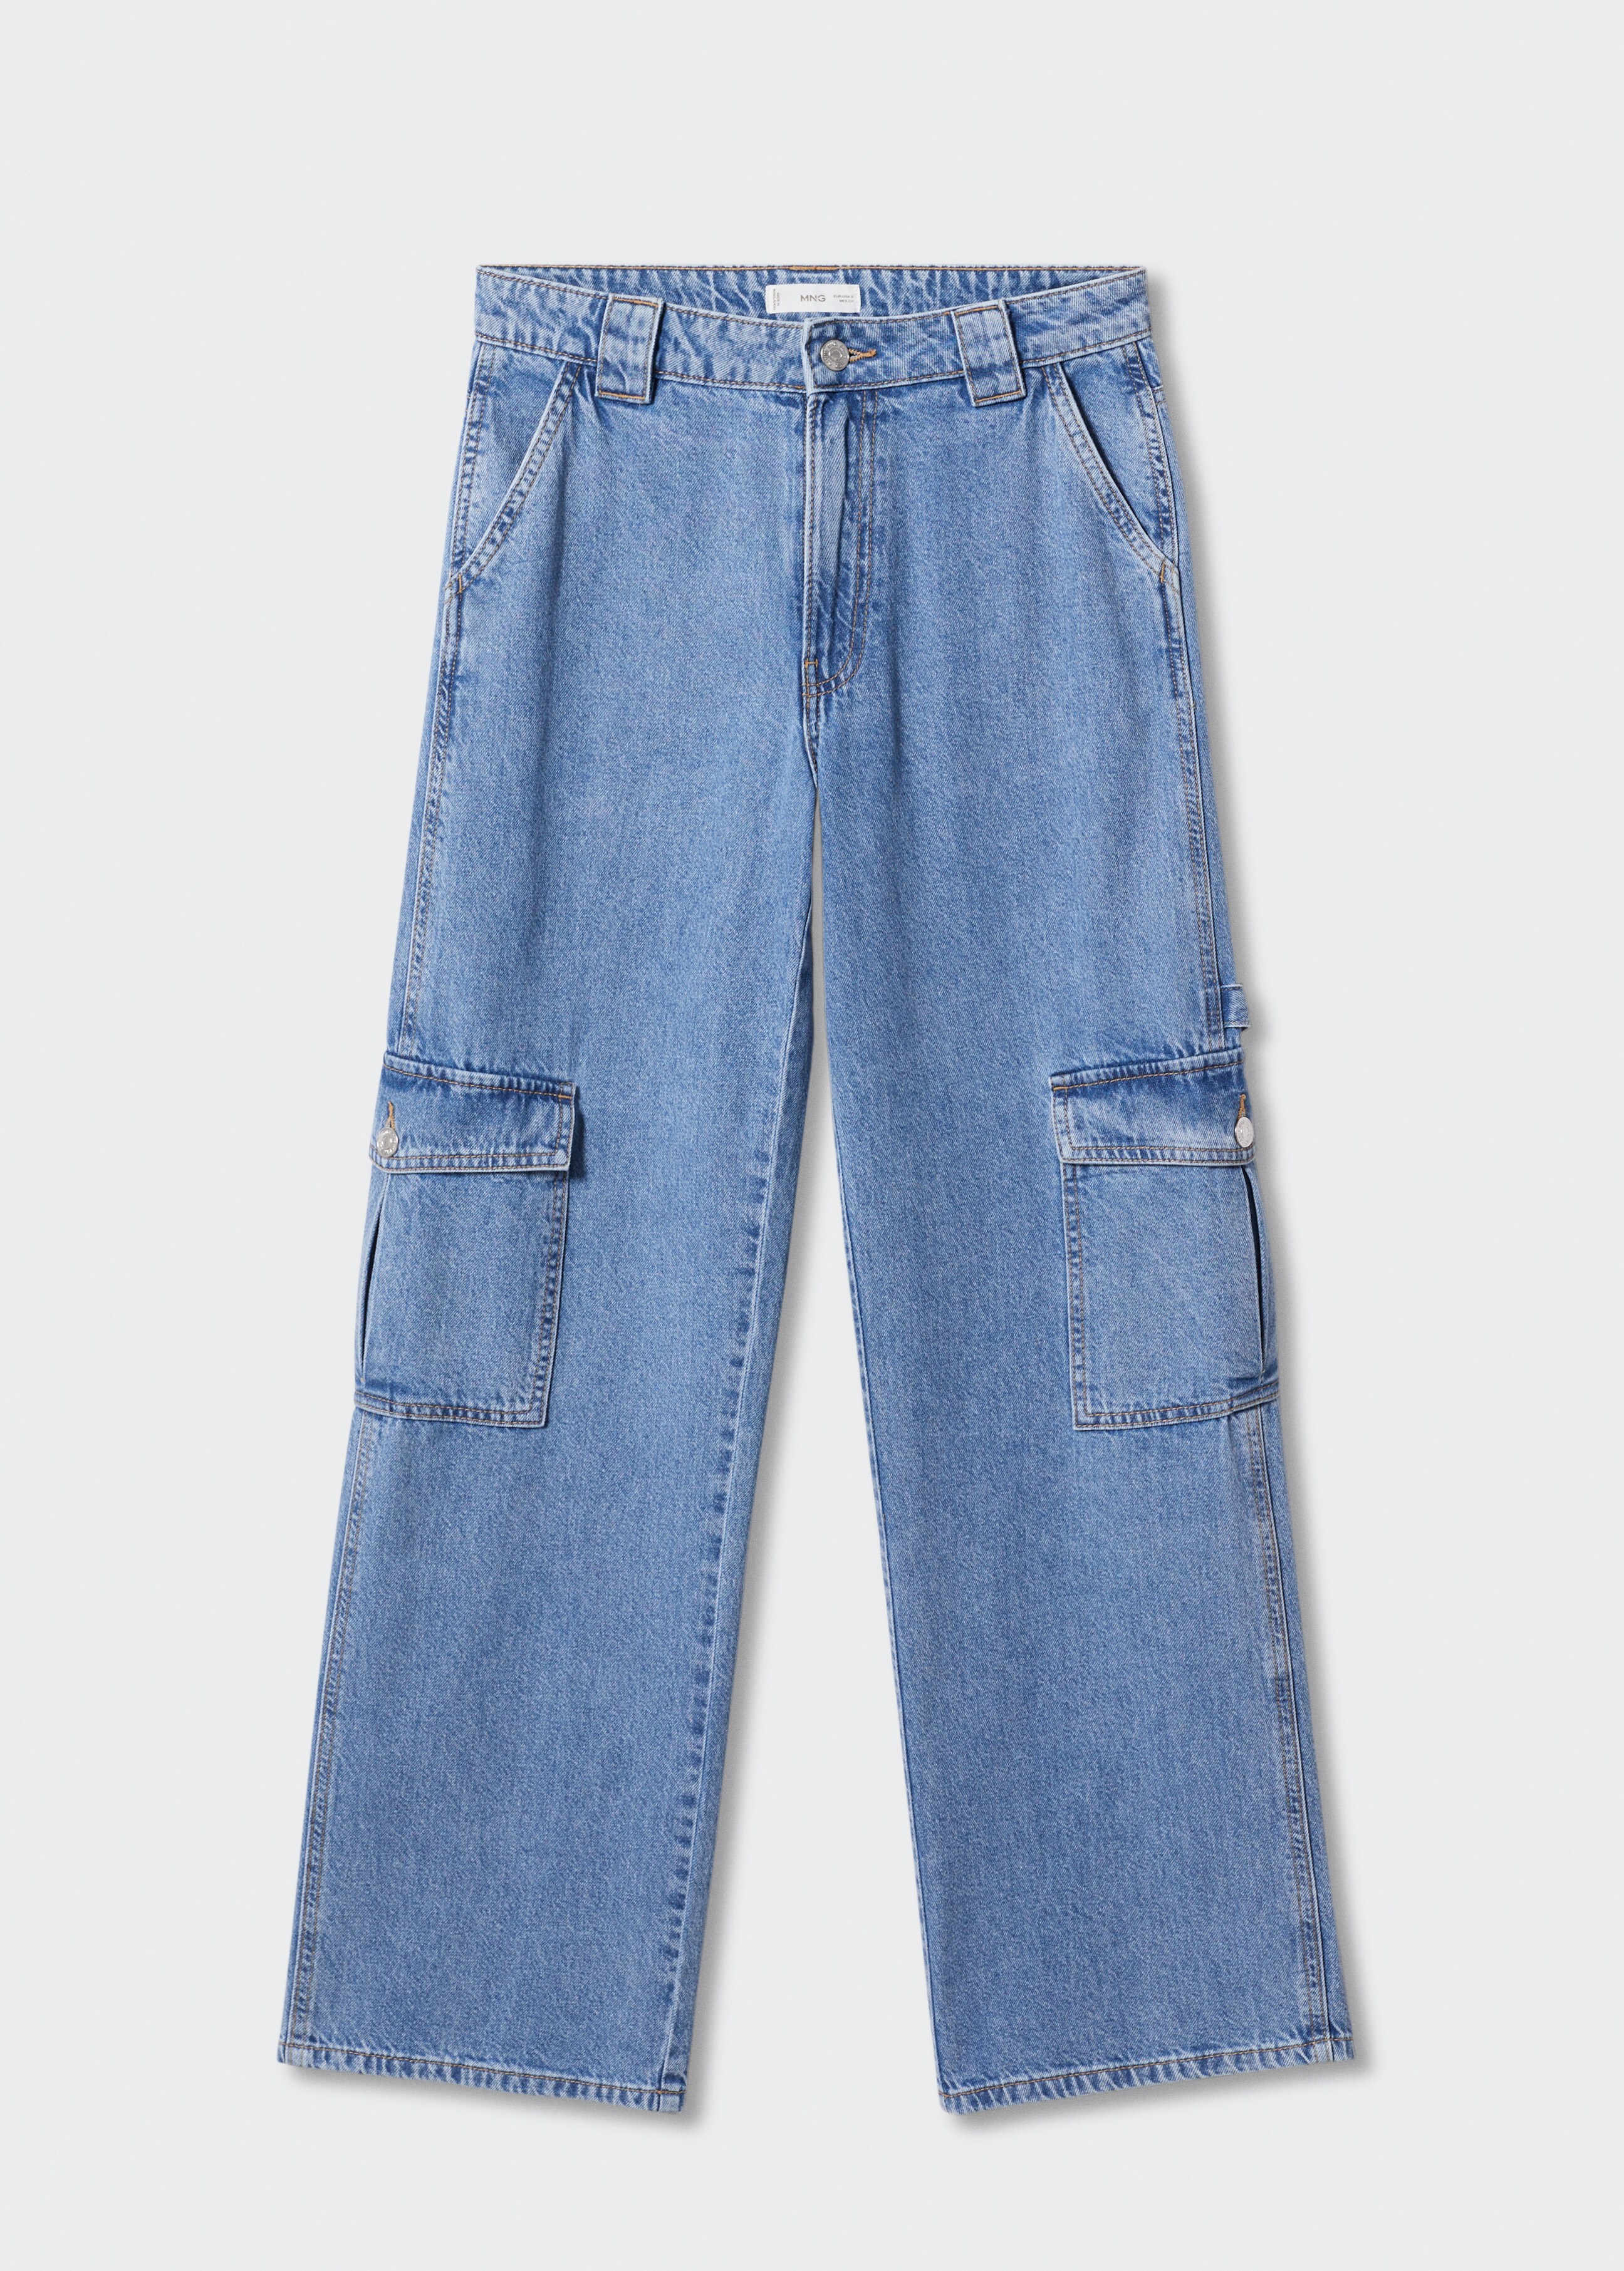 Cargo style straight jeans - Article without model